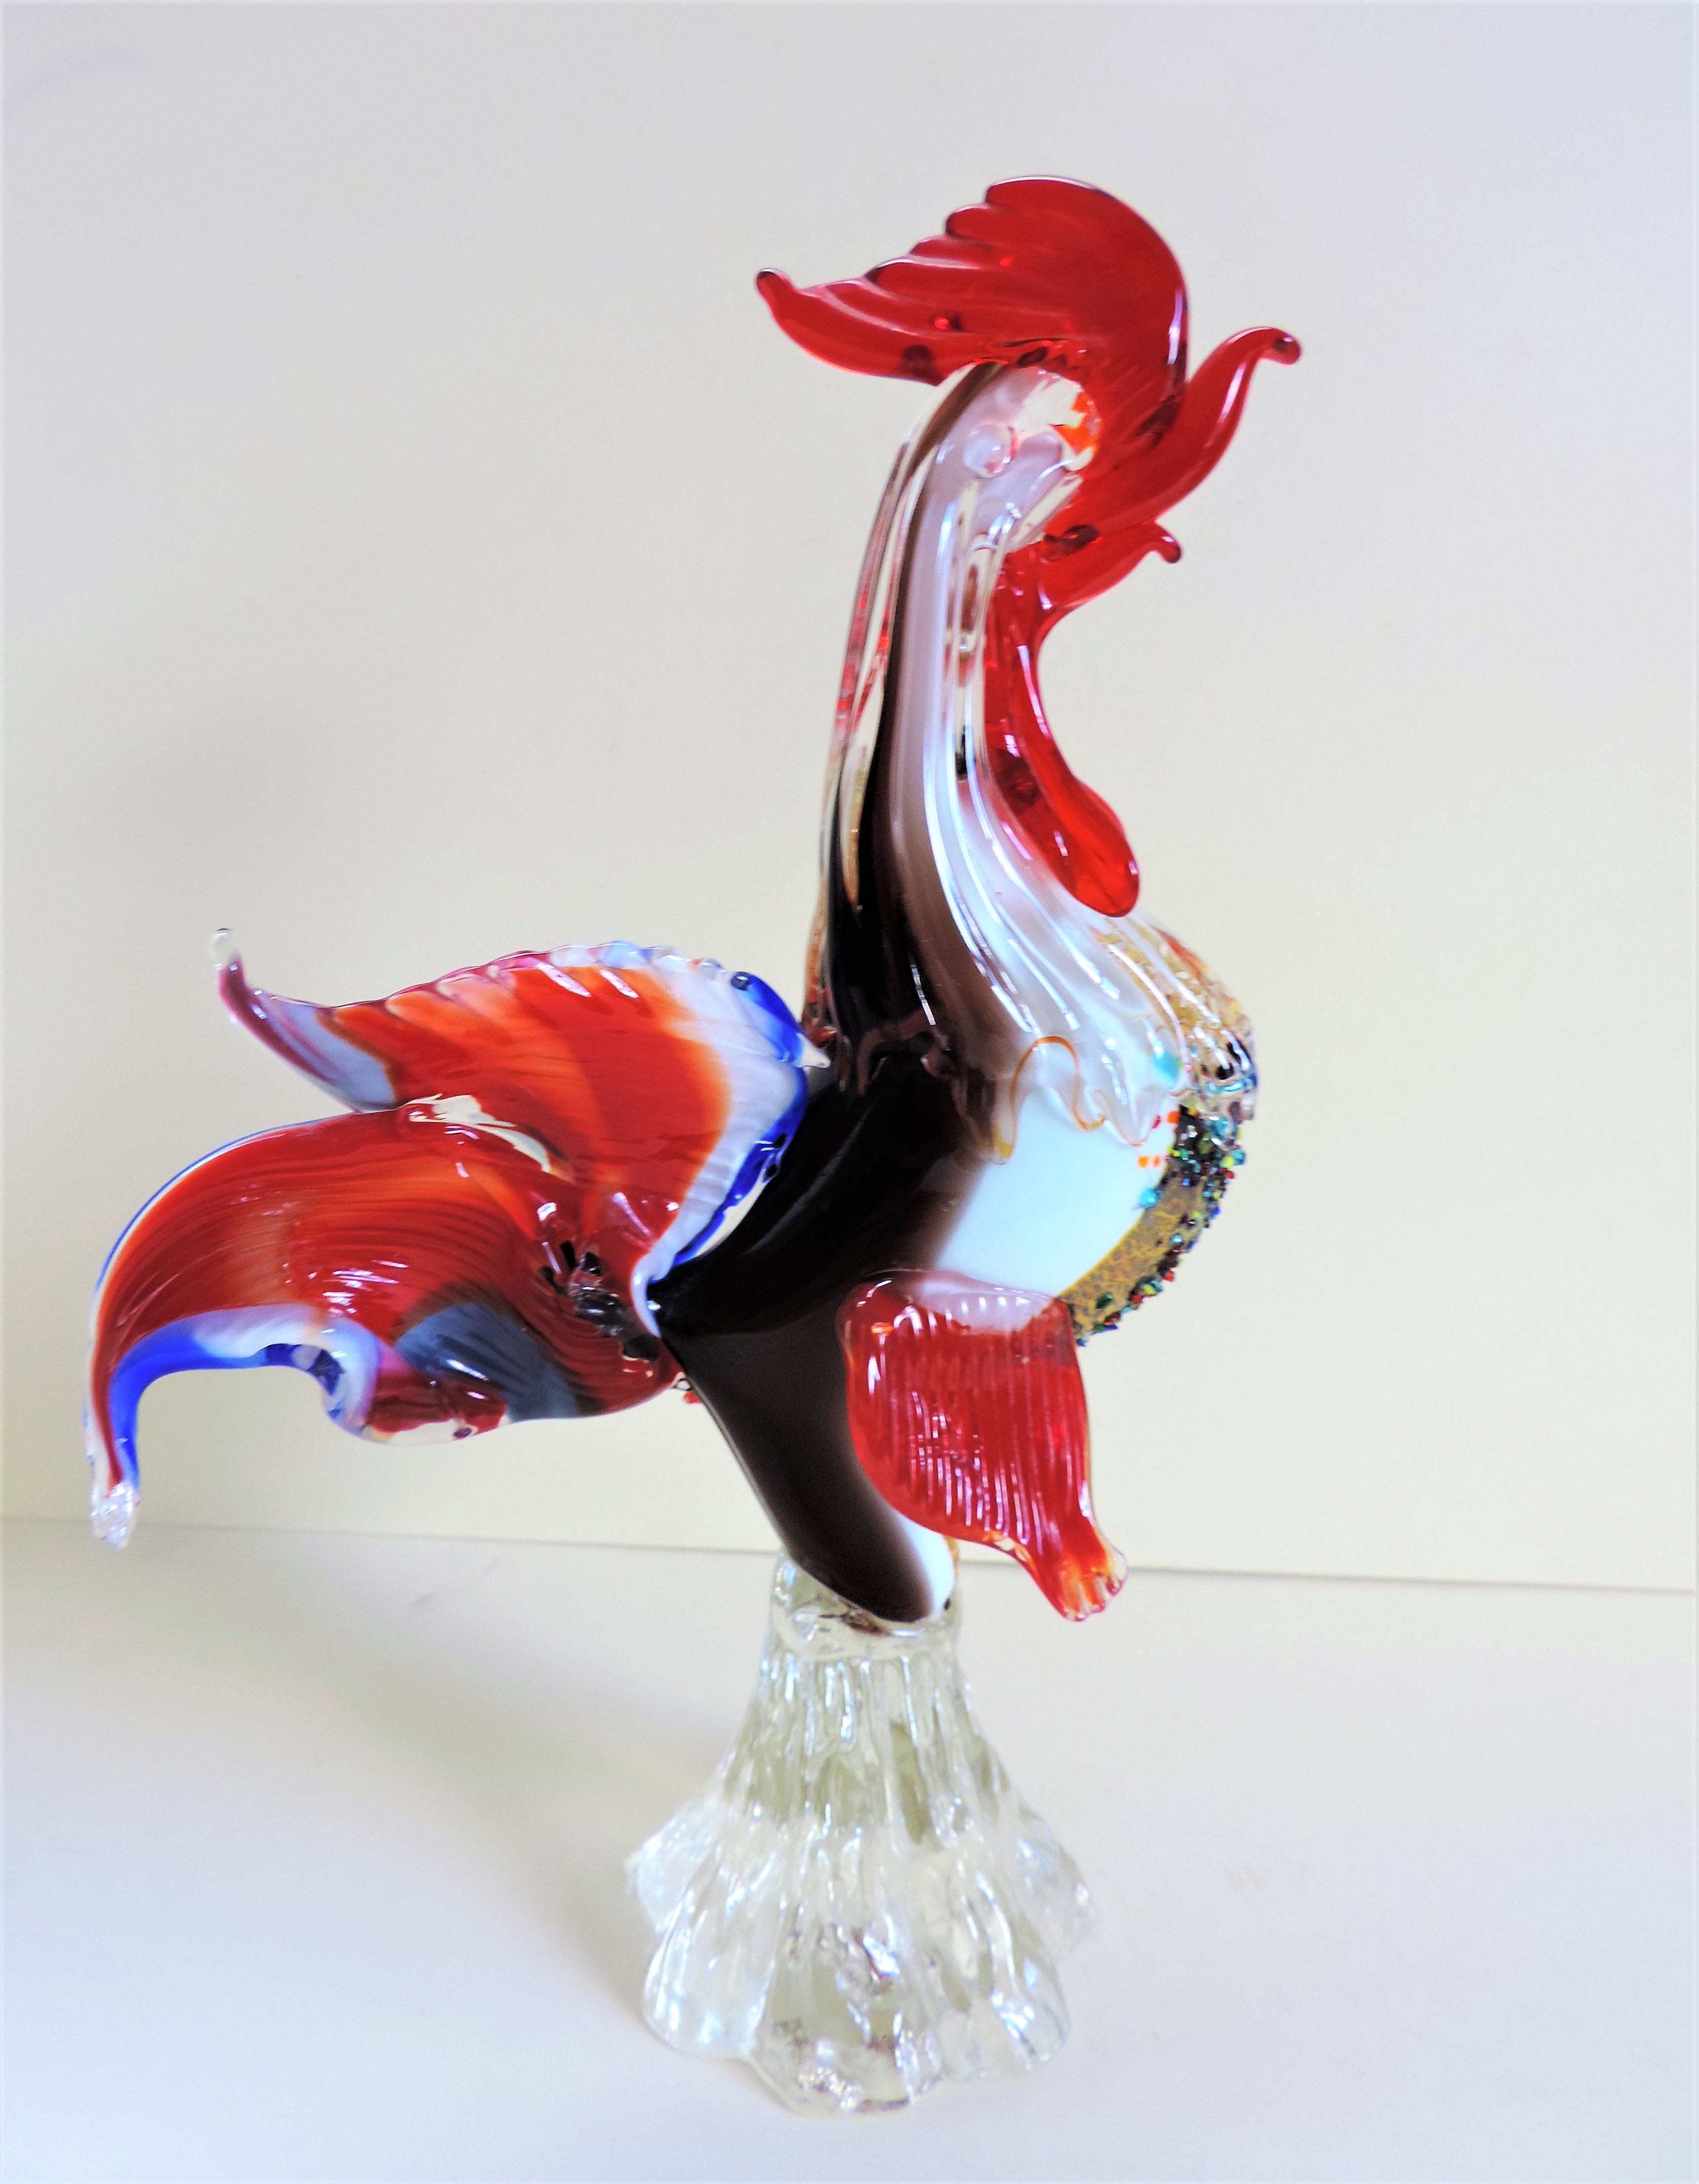 Large Vintage Murano Glass Rooster Sculpture 30cm Tall - Image 7 of 7